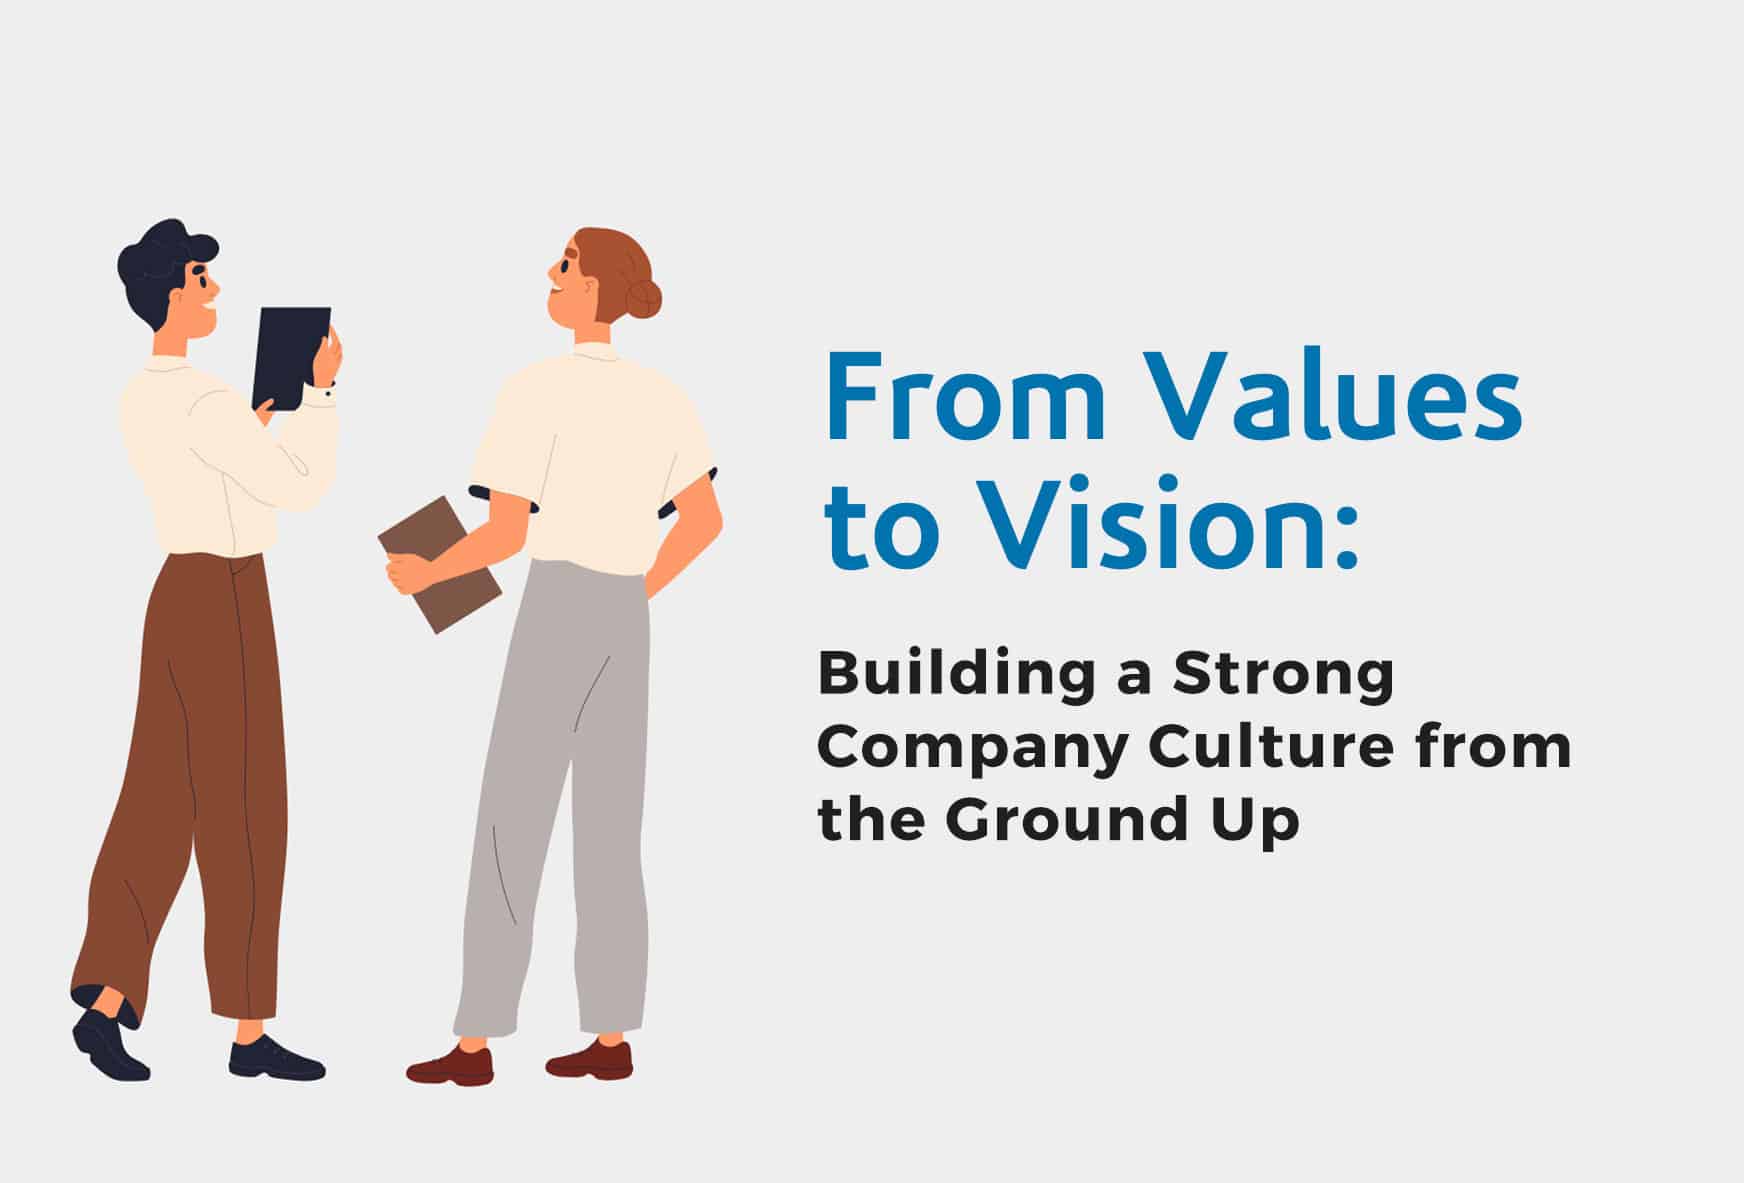 Building a Strong Company Culture from the Ground Up